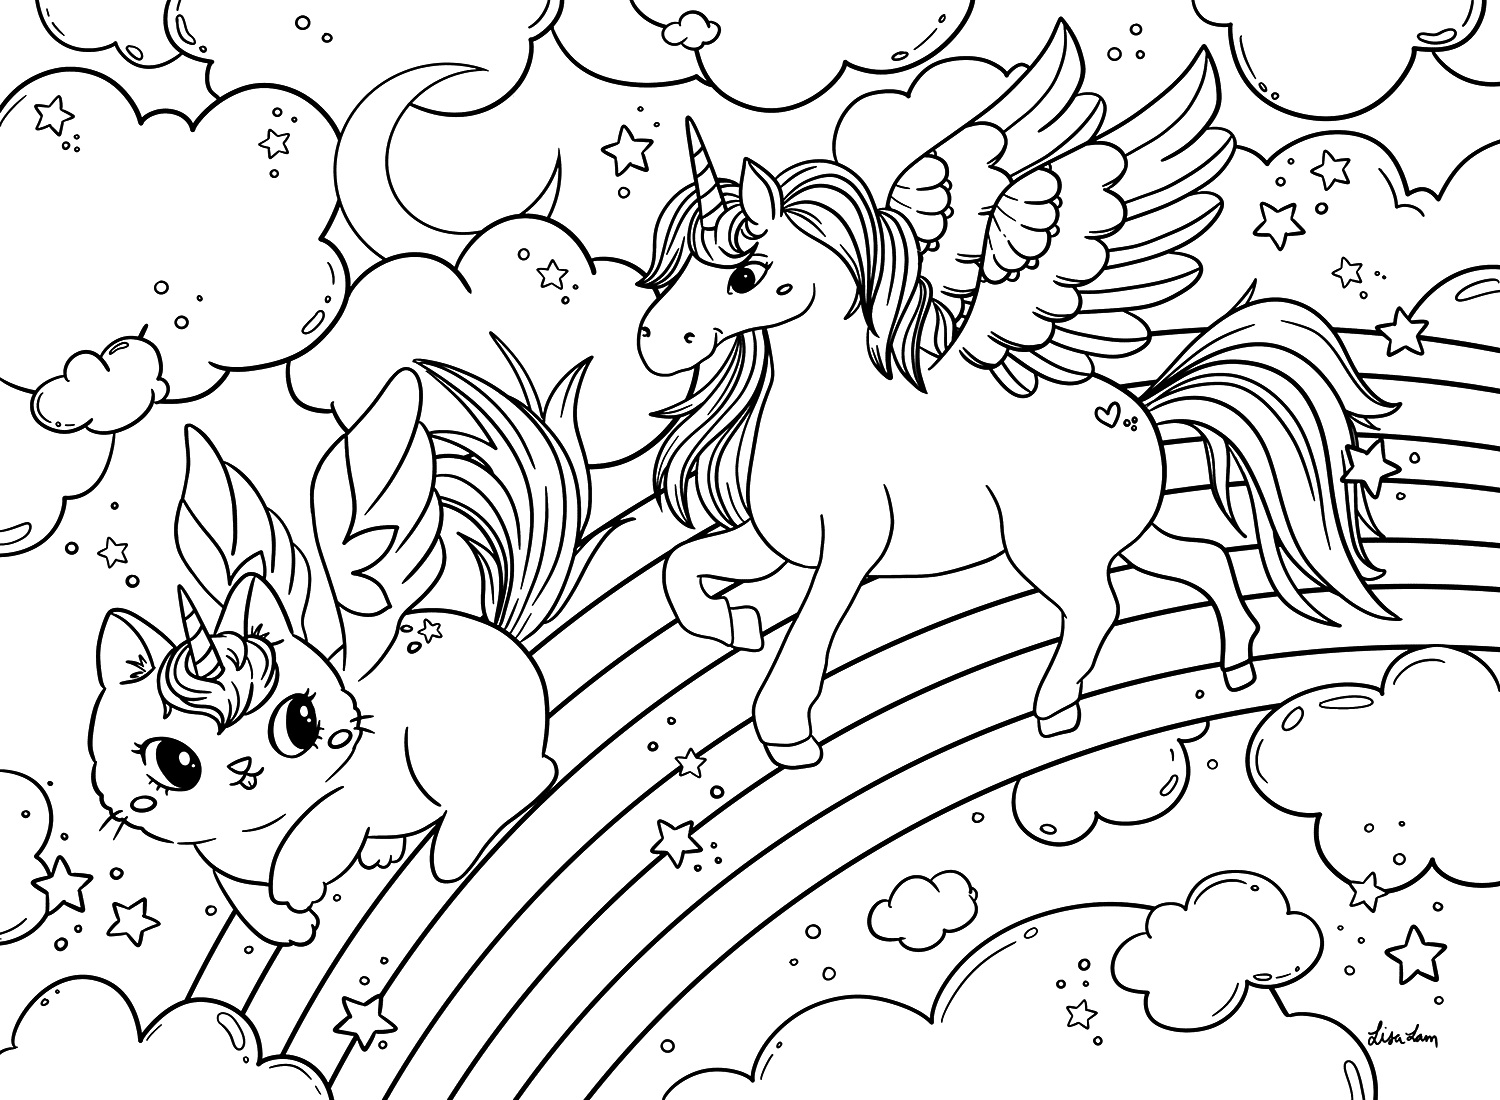 Unicorn Cats Coloring Pages from Unicorn Cat